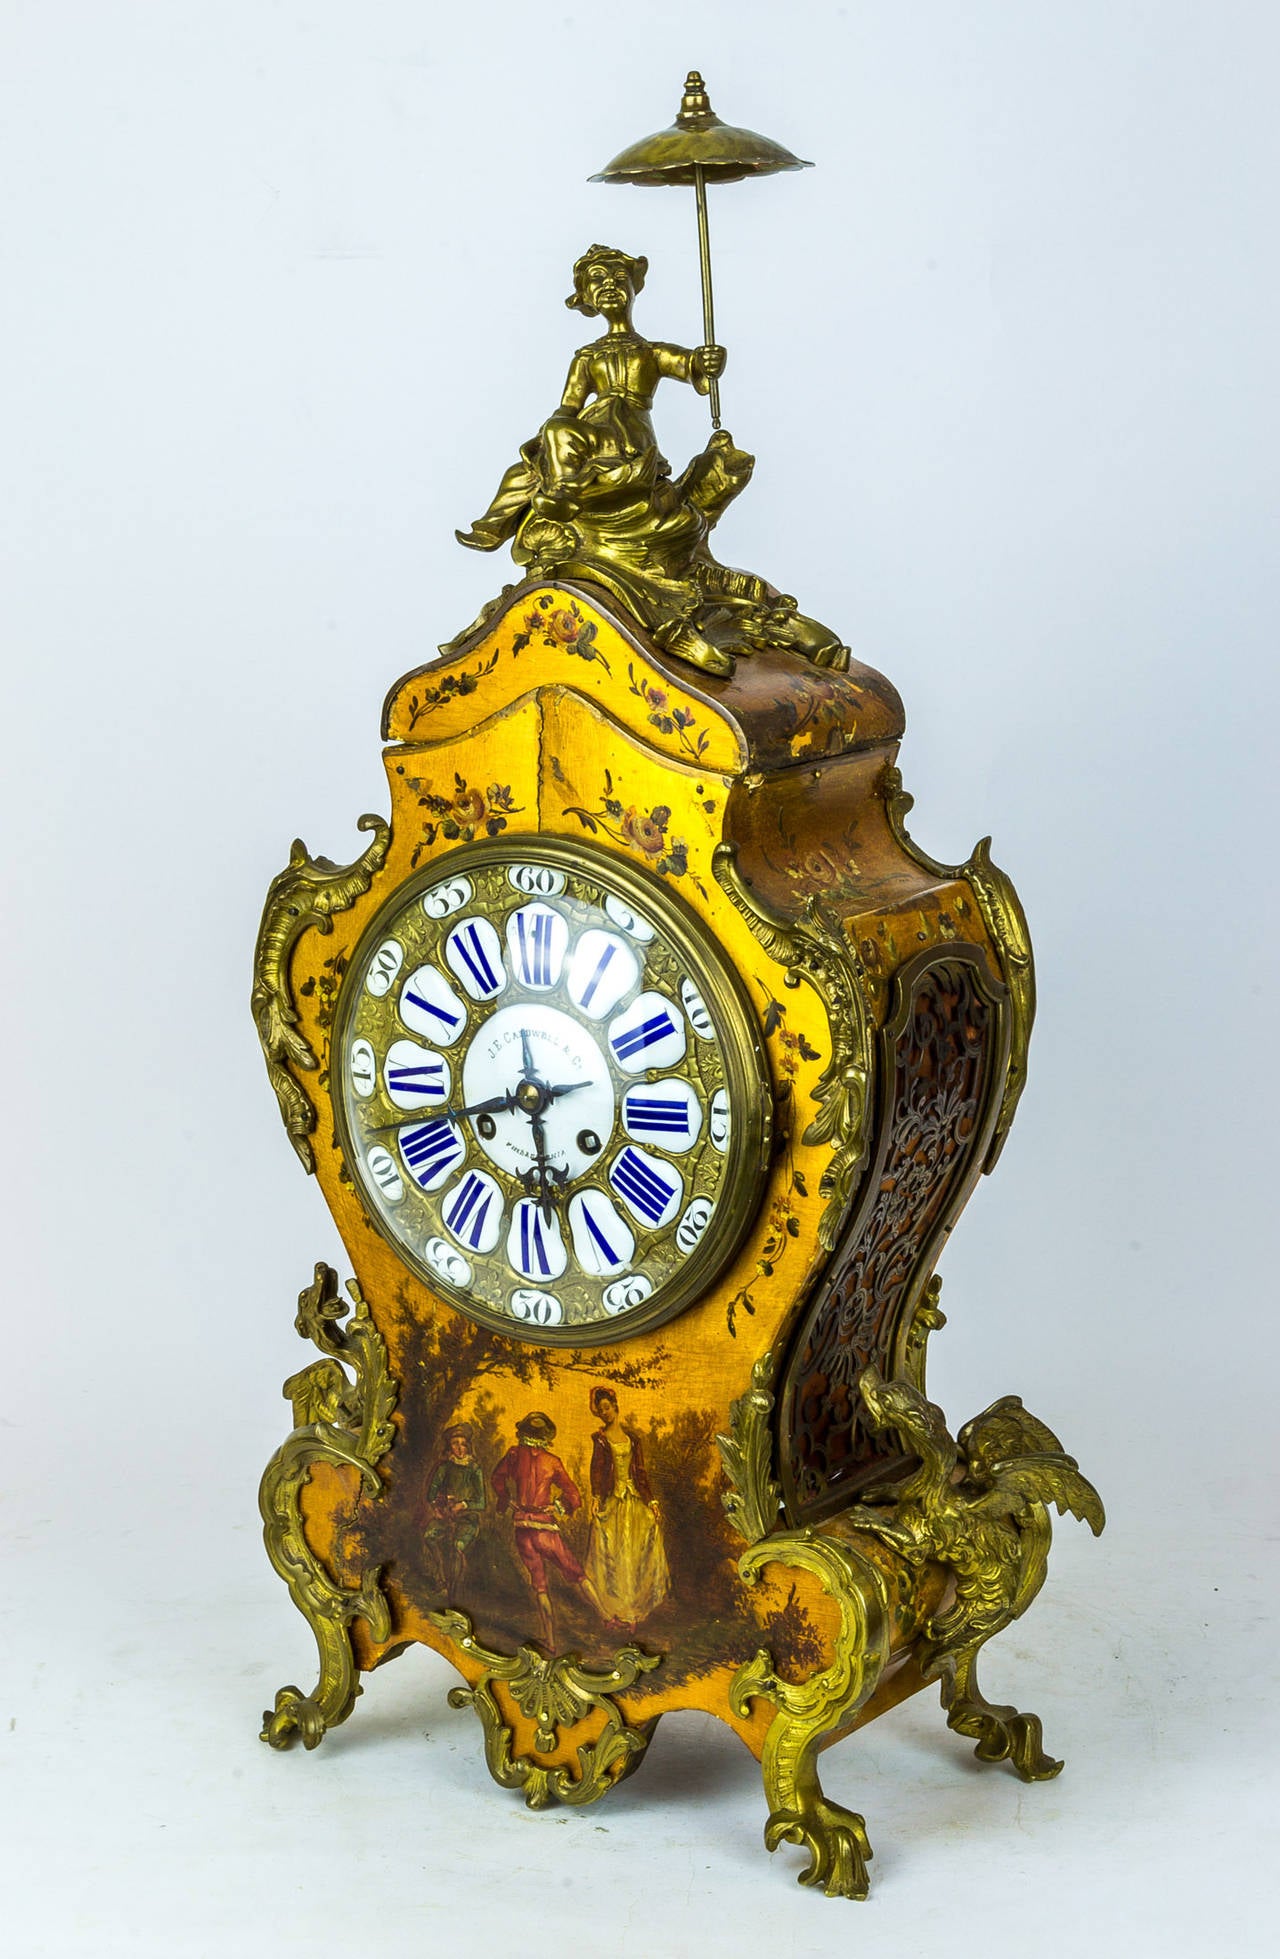 A Fine Chinoiserie Gilt Bronze Figural Mantel Clock by J.E. Caldwell & Co.
Stock Number: CC33